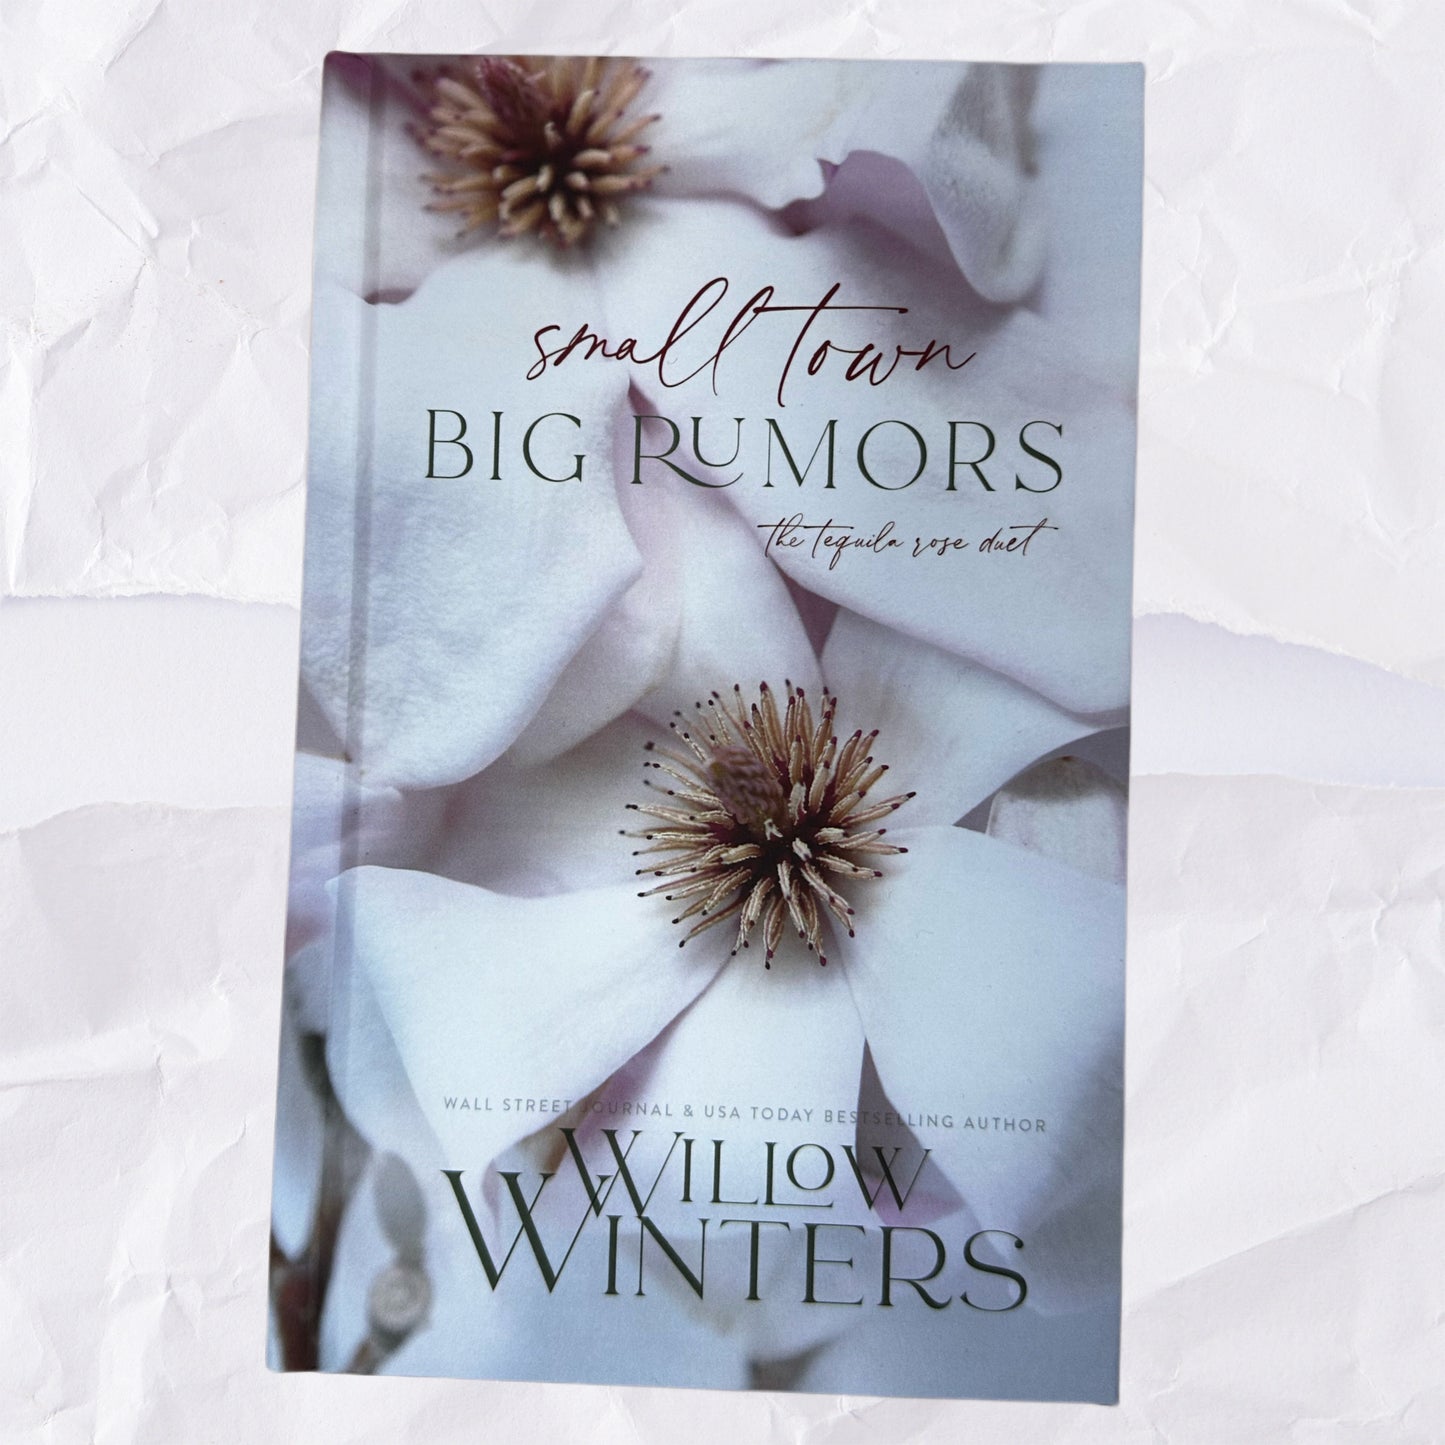 Small Town Big Rumors: The Tequila Rose Duet by Willow Winters - Hardcover